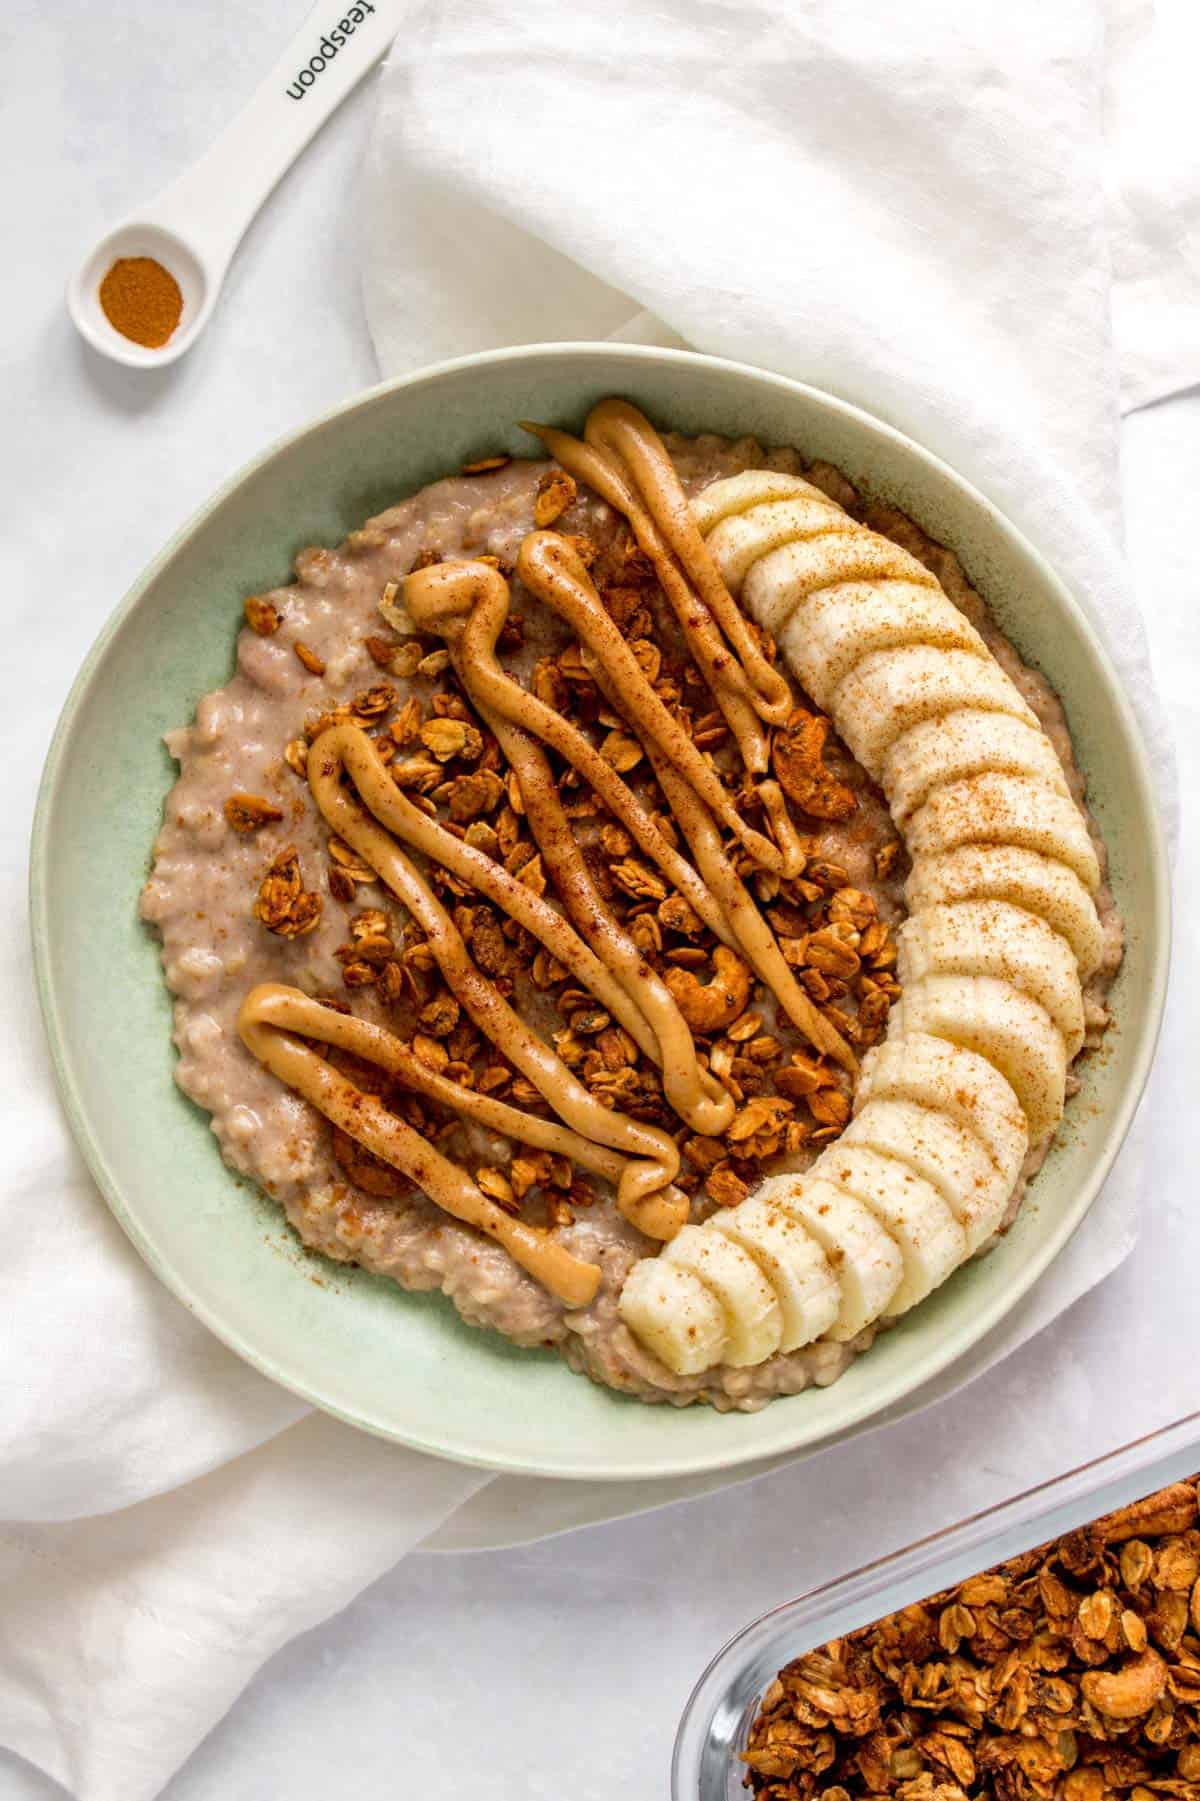 A plate of banana bread oatmeal with sliced bananas, granola, and nut butter.